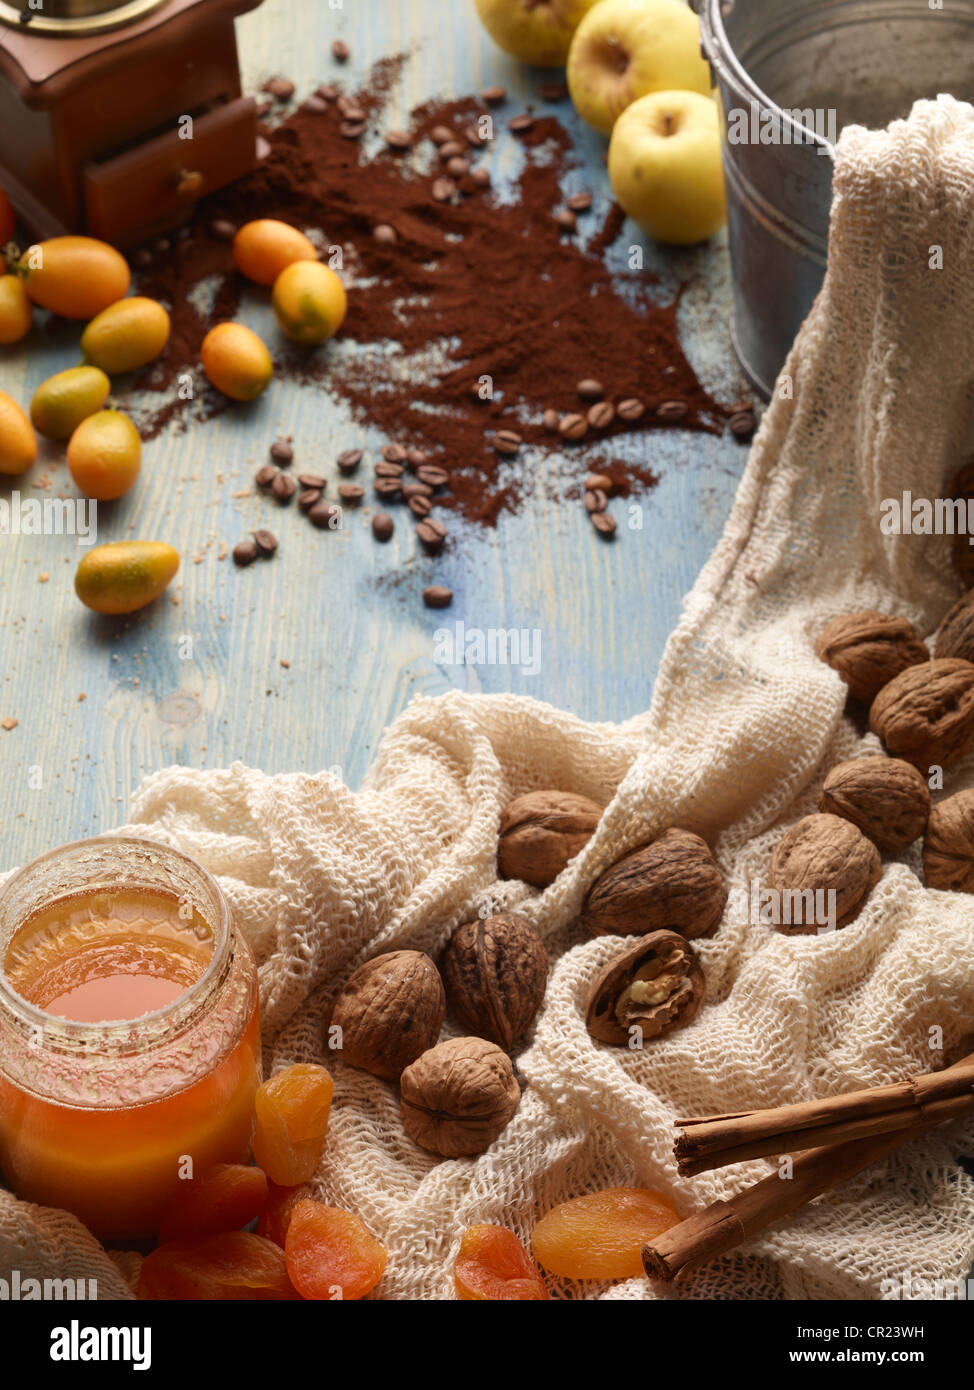 Nuts, jam, coffee and fruit on table Stock Photo